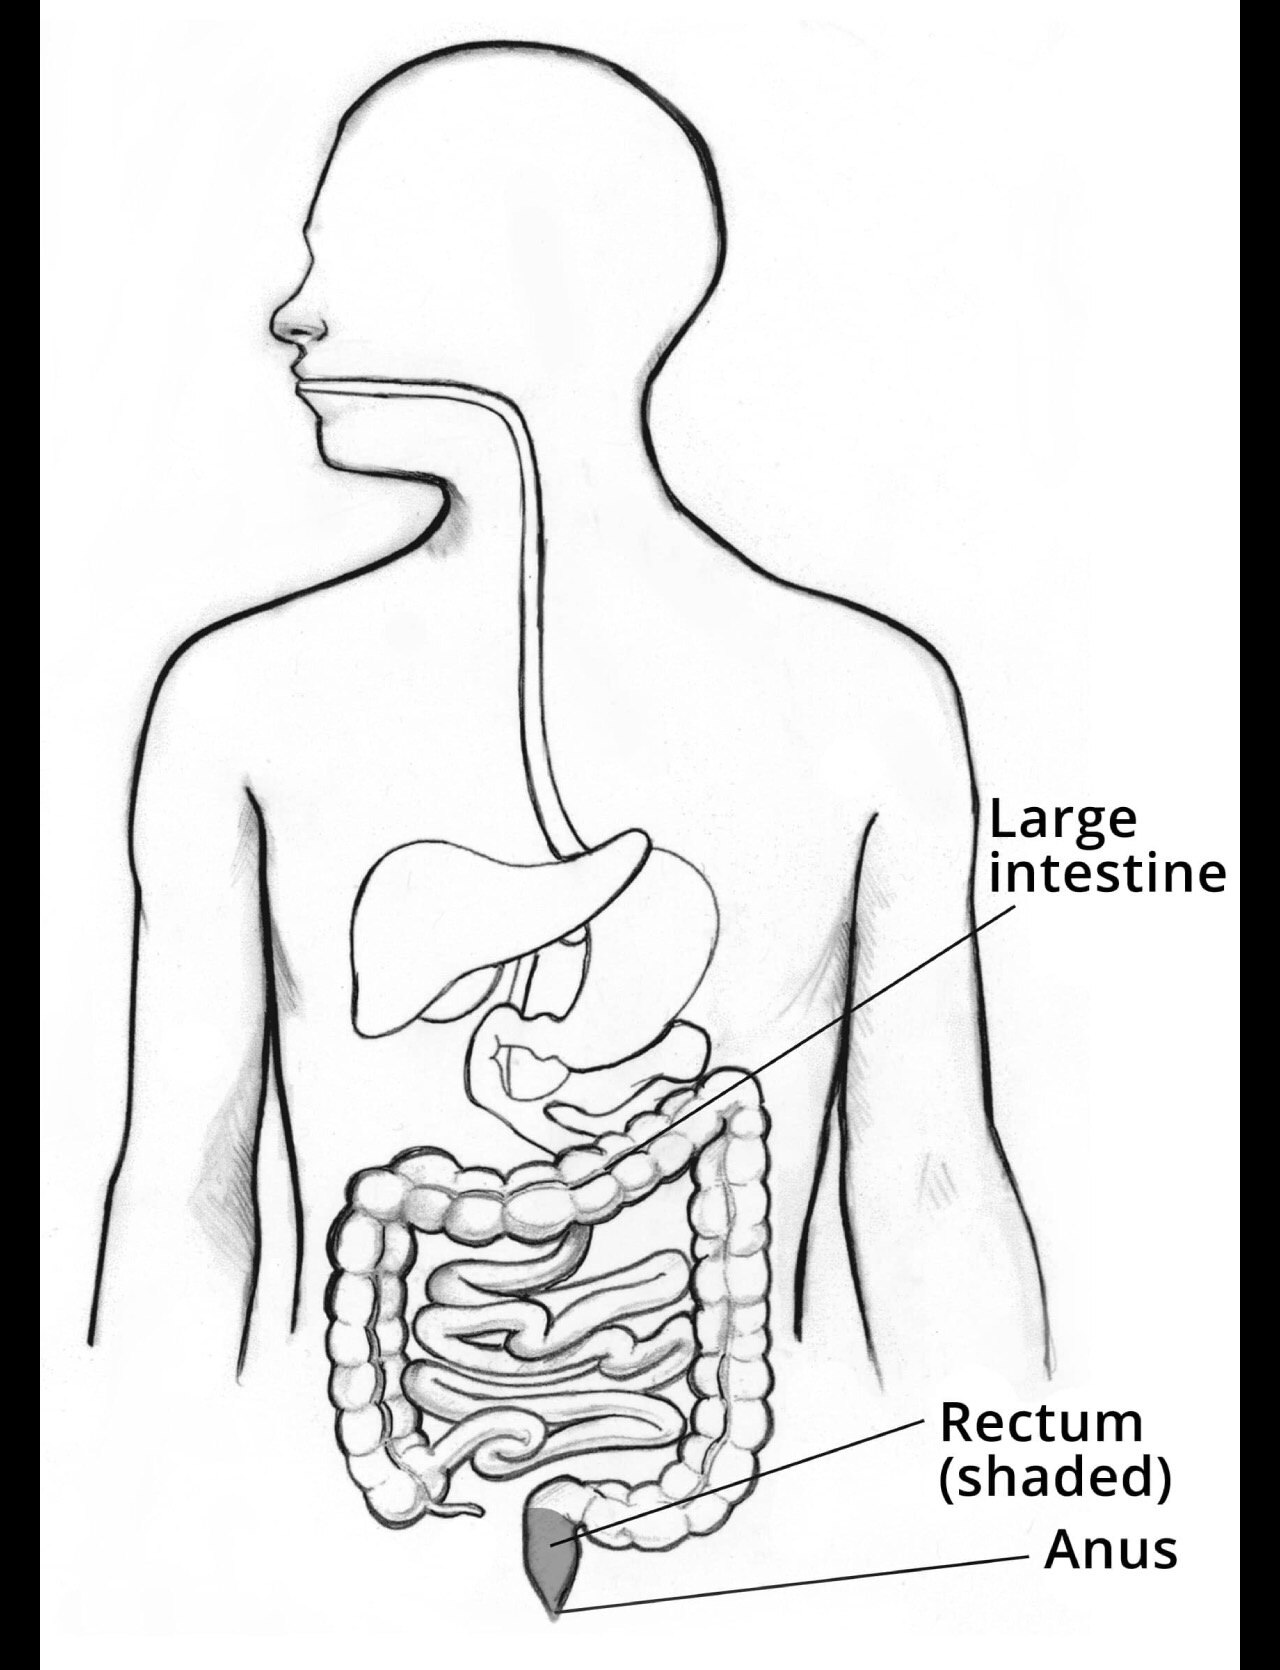 Illustration of the digestive system, with labels for the large intestine, rectum, and anus.